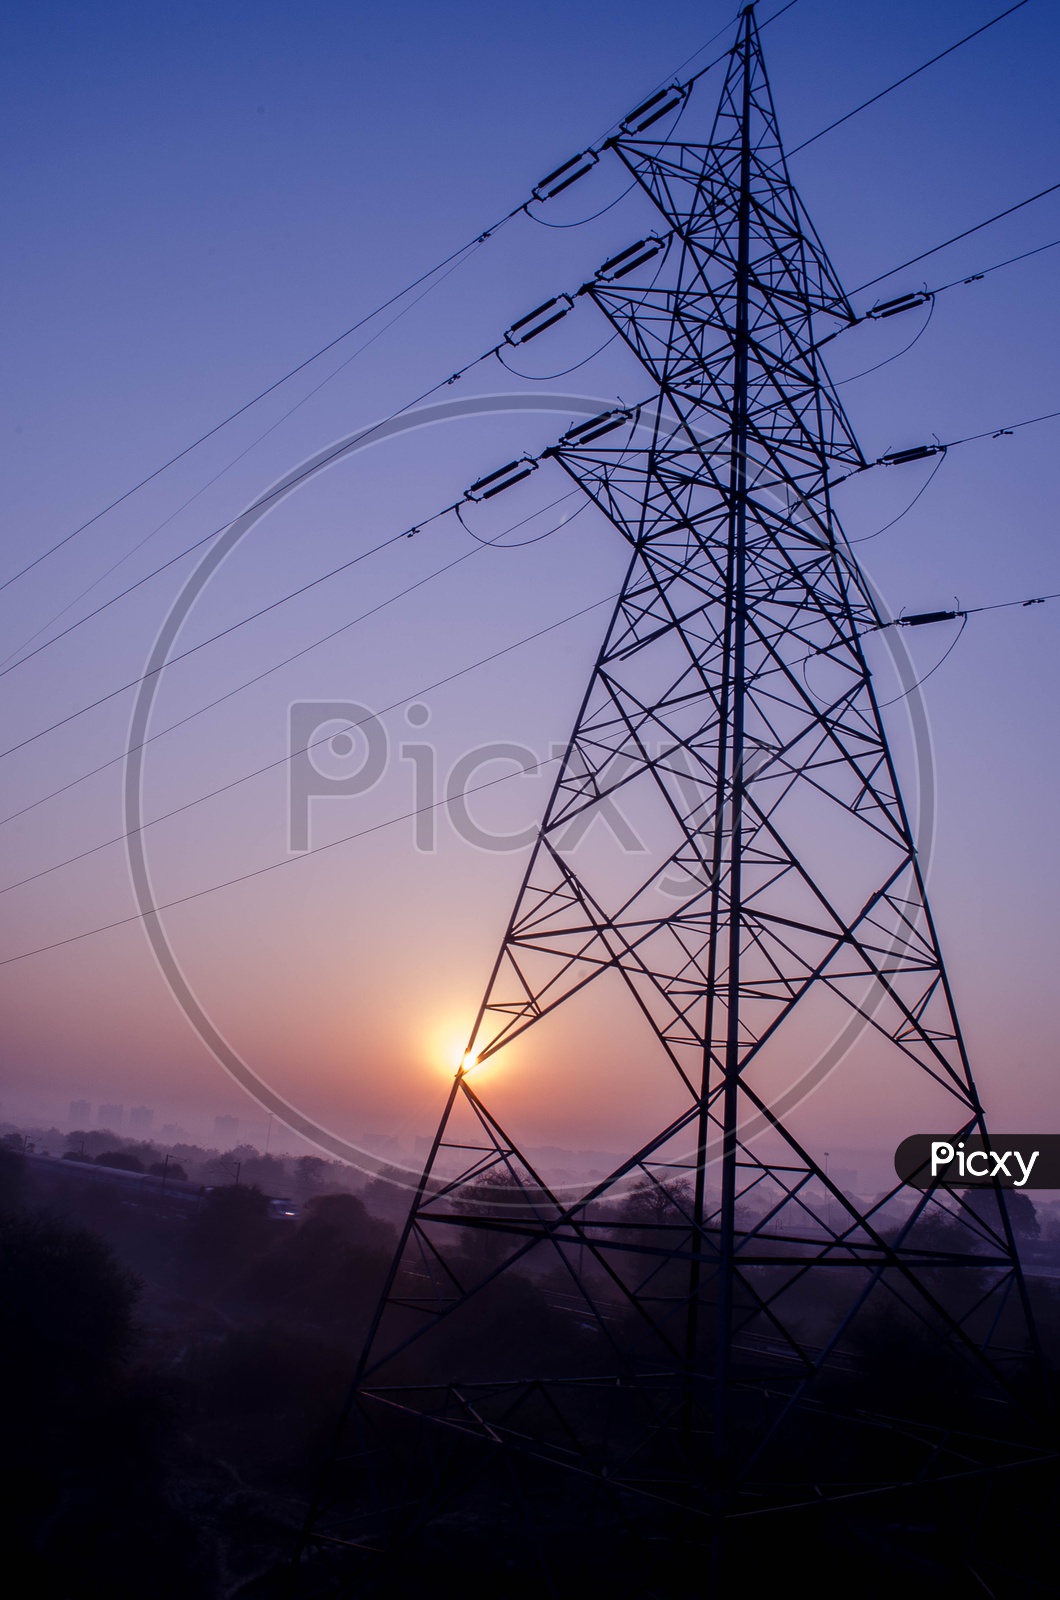 Silhouette Of a Electric high Tension Poles